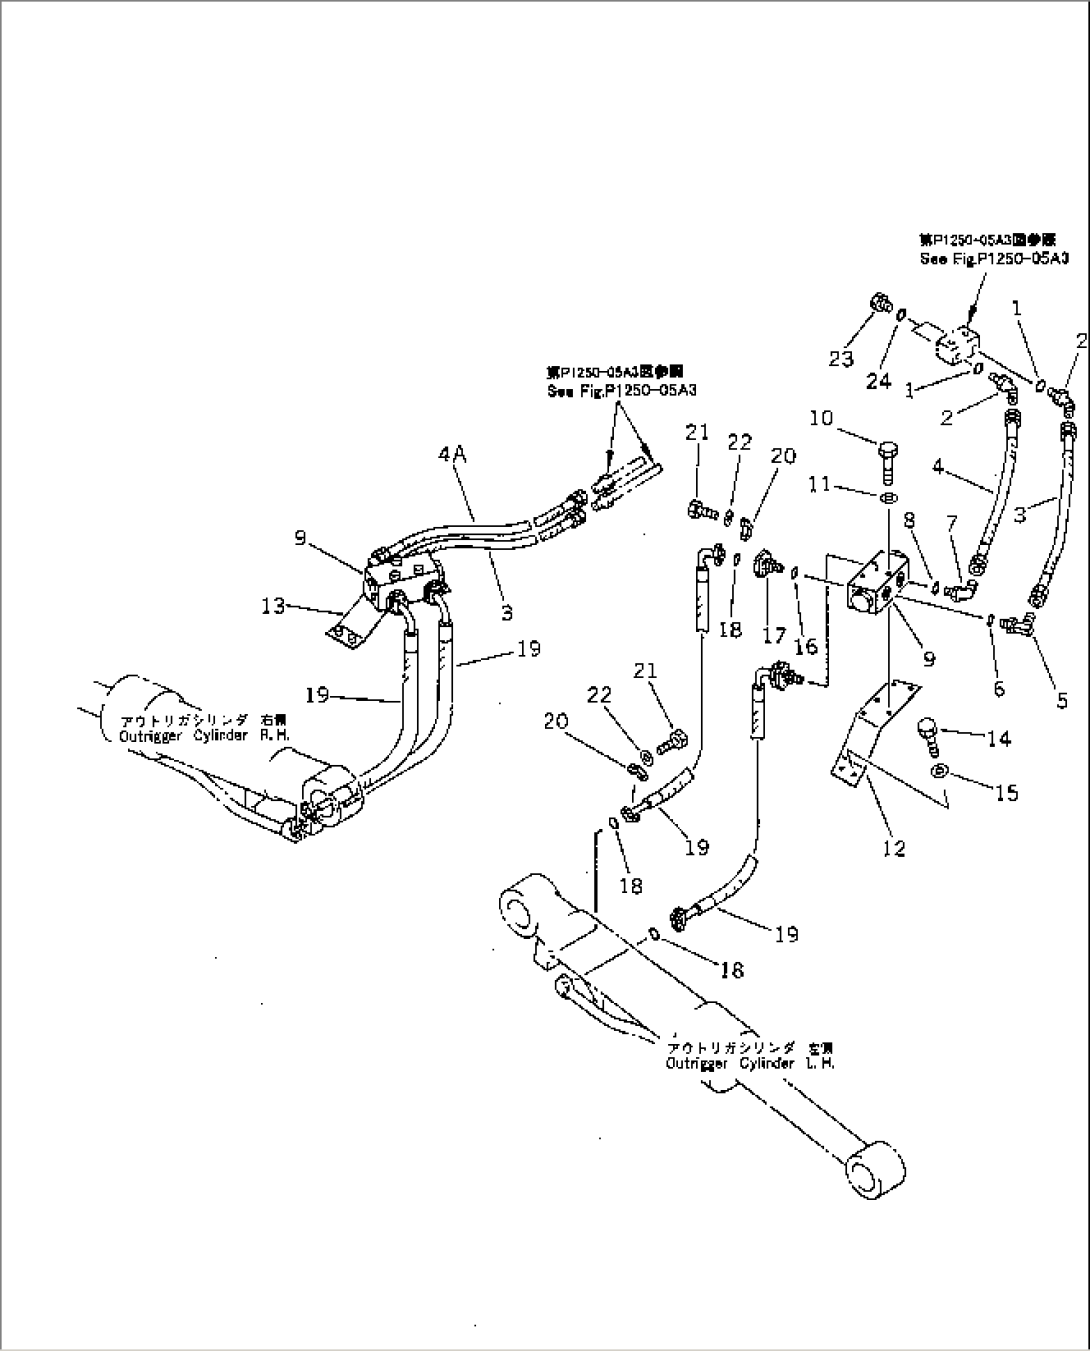 FRONT OUTRIGGER PIPING (WITH INDEPENDENT LEFT/RIGHT AND FRONT/REAR OUTRIGGER)